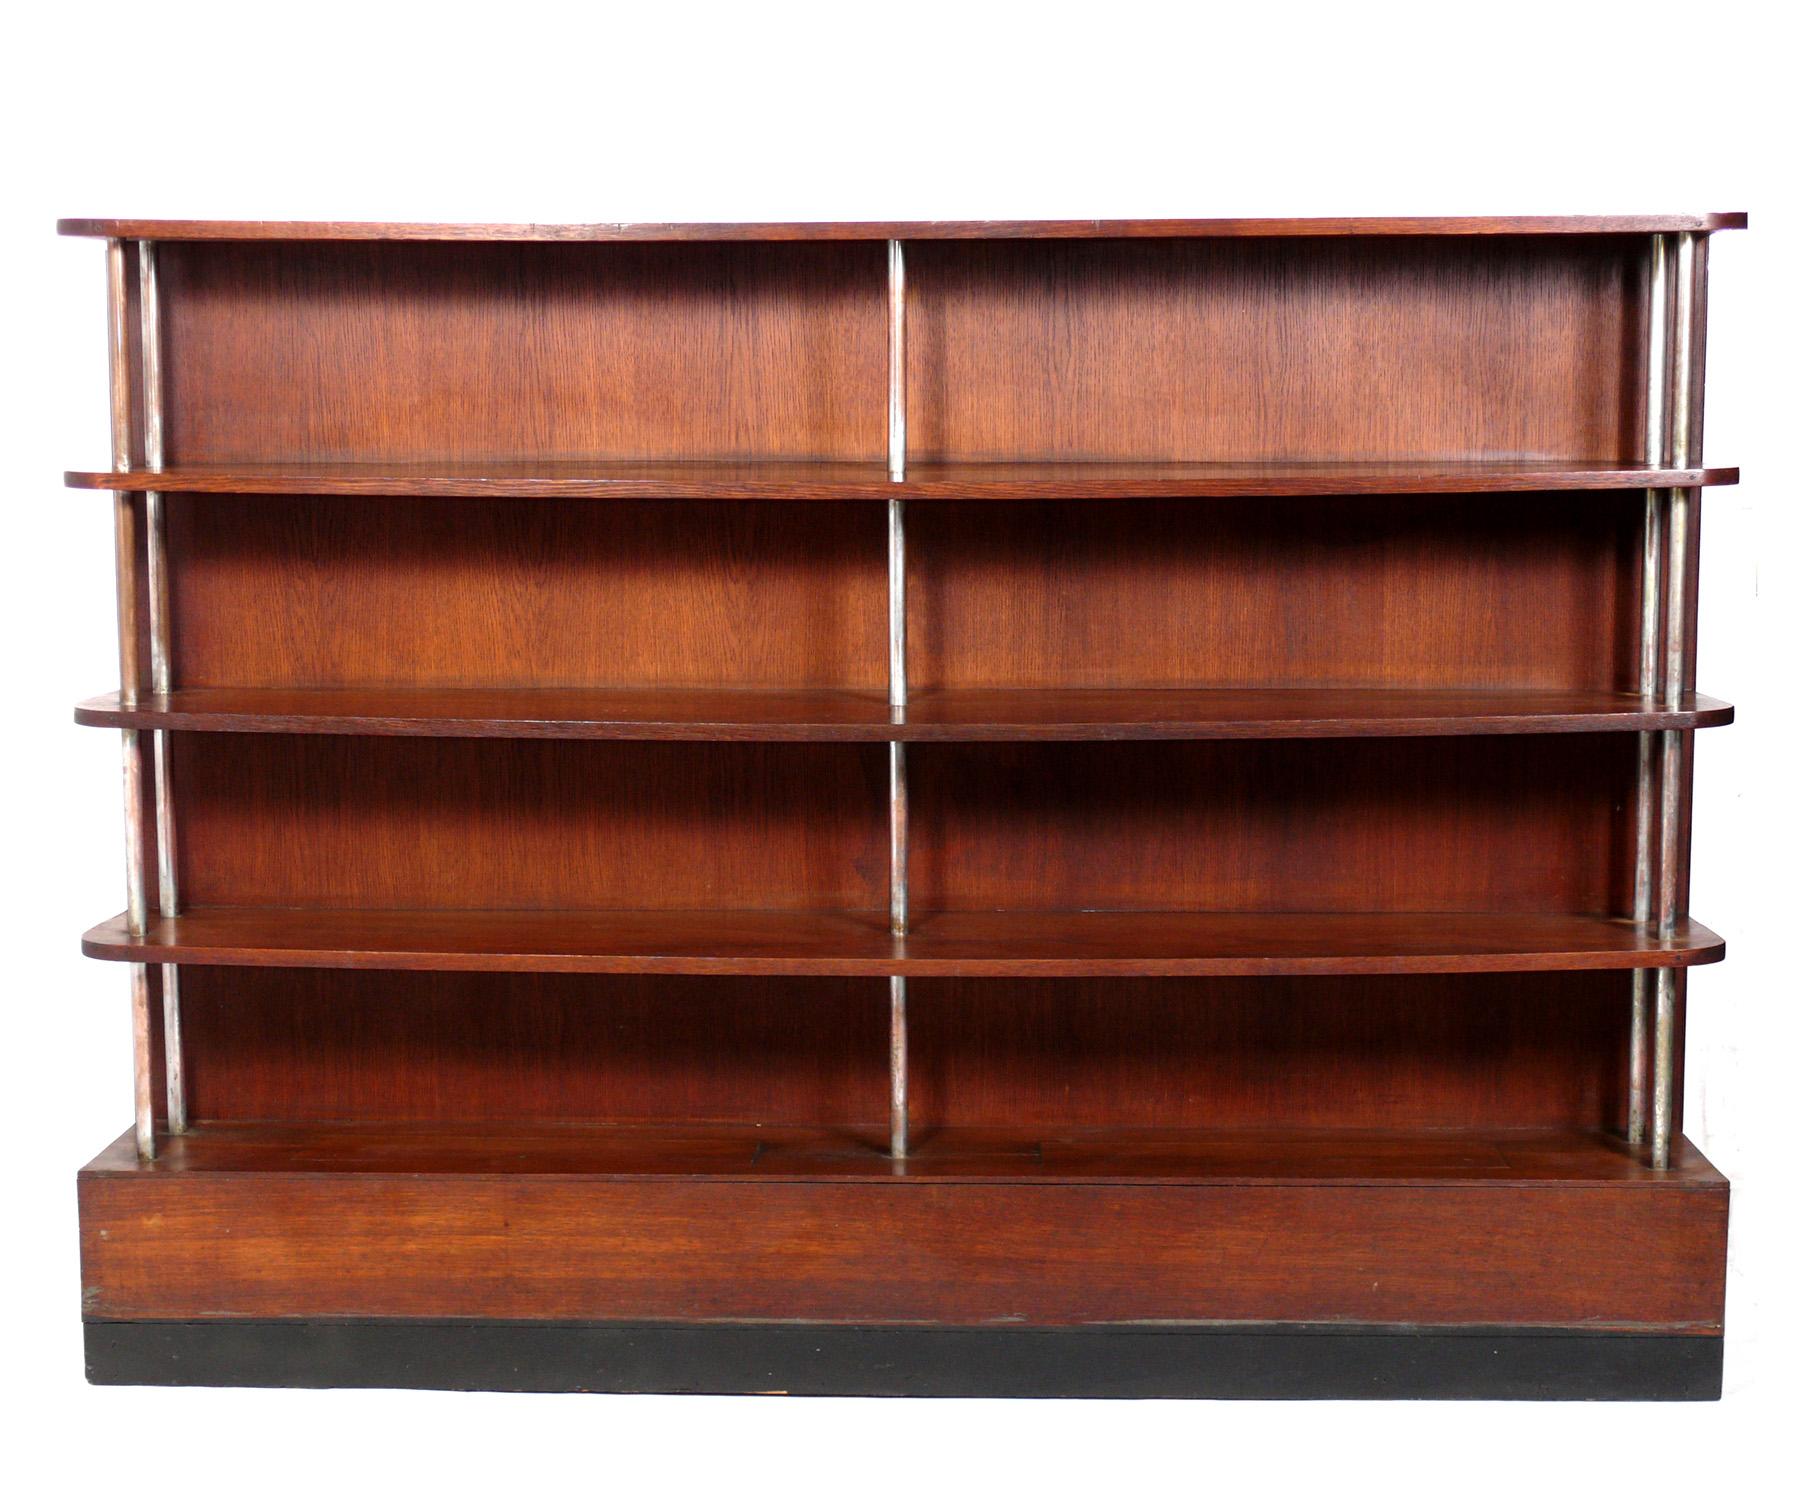 1930s Art Deco Bookcase, in the manner of Gilbert Rohde, American, circa 1930s. This came from the same estate as the Gilbert Rohde for Herman Miller desk we currently have listed on 1stdibs, and according to the estate, it was custom made to match